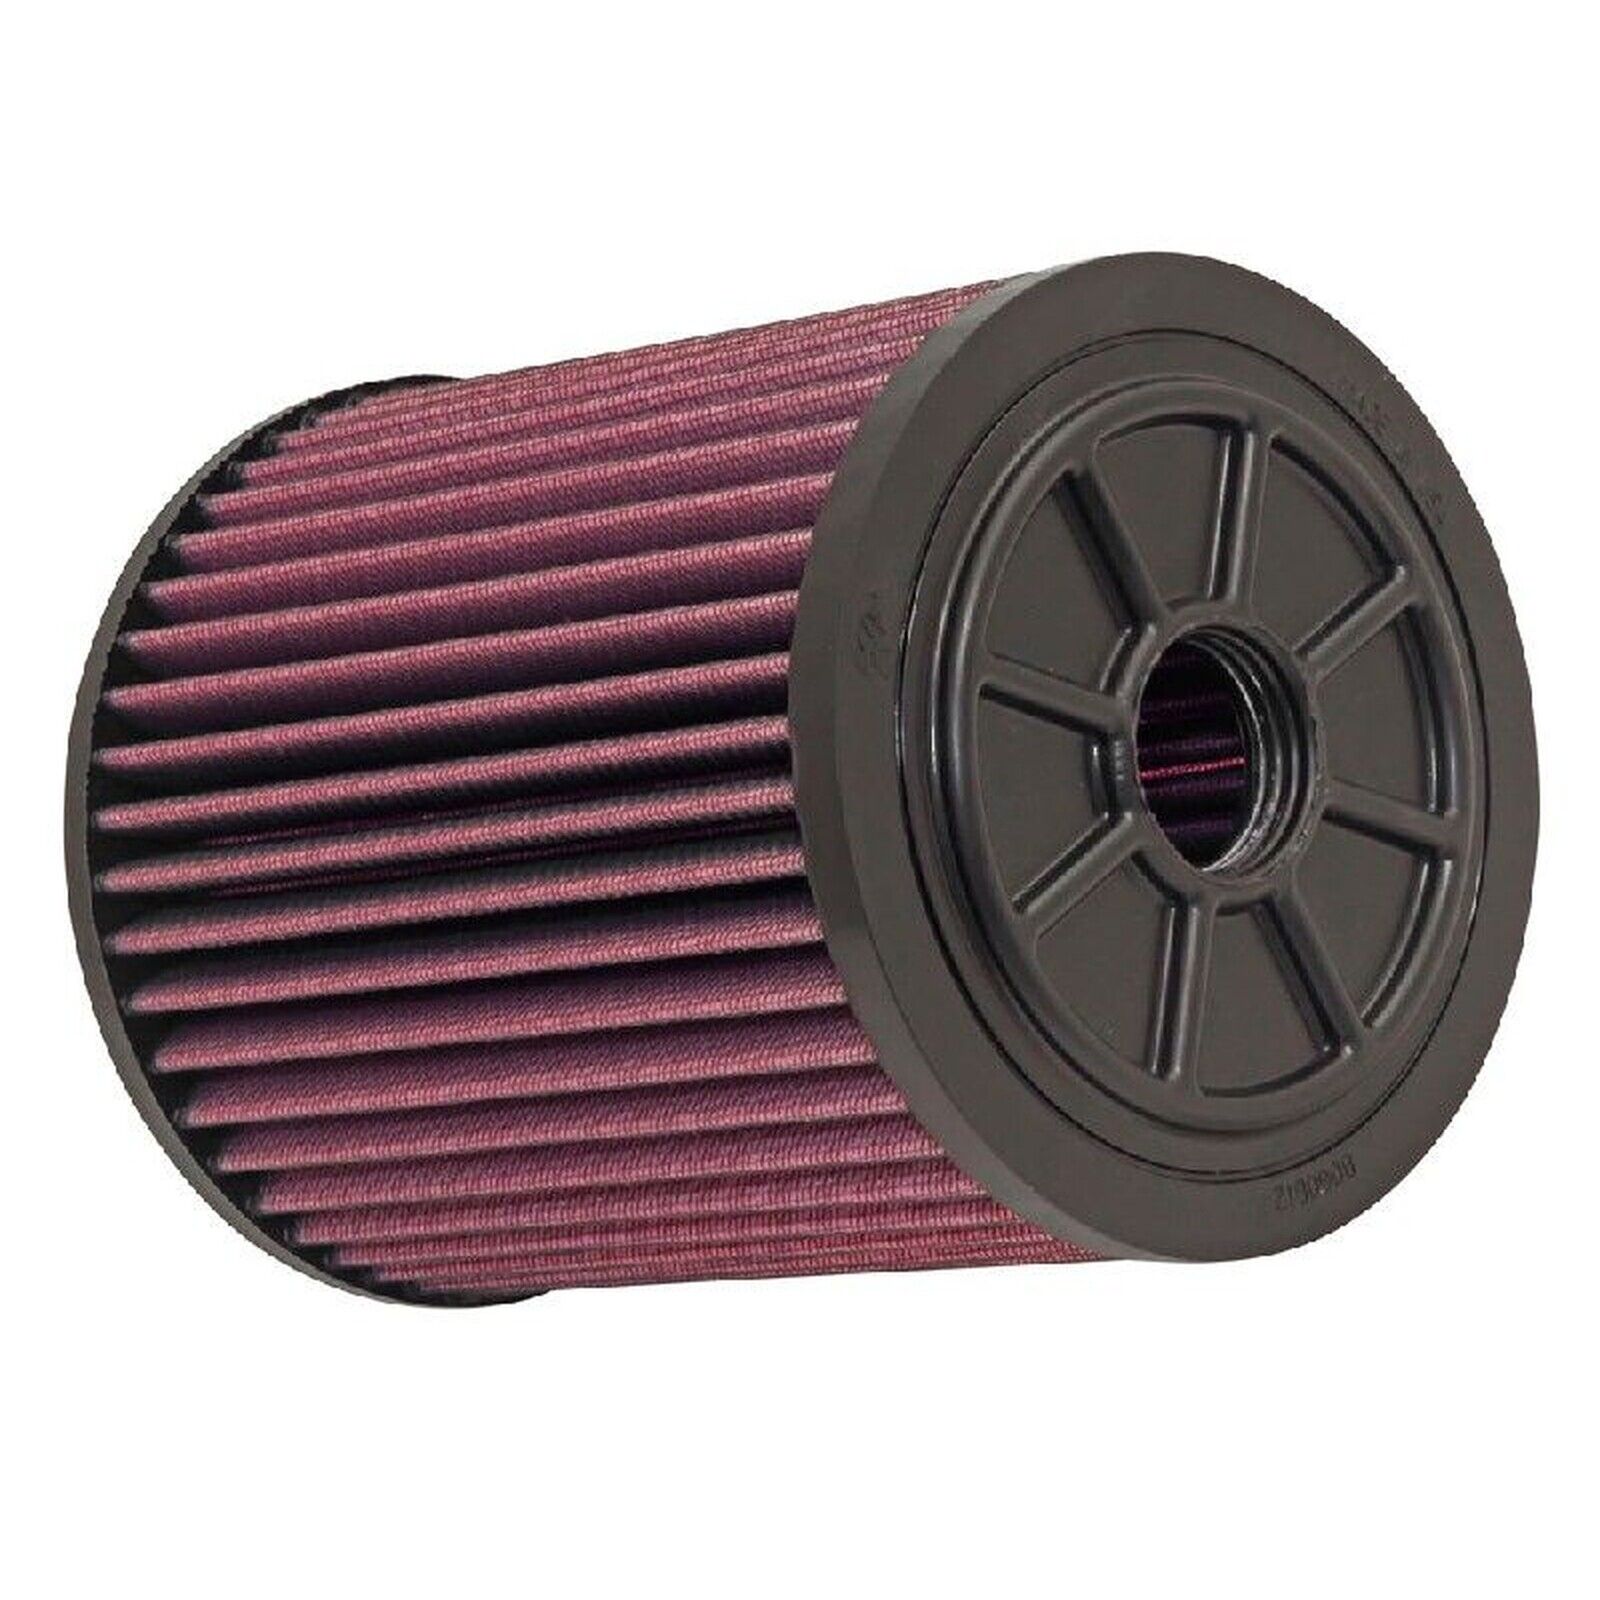 K&N Replacement Air filter for Audi 4.0l RS6 and RS7 2013/14 - E-0664 - K and N